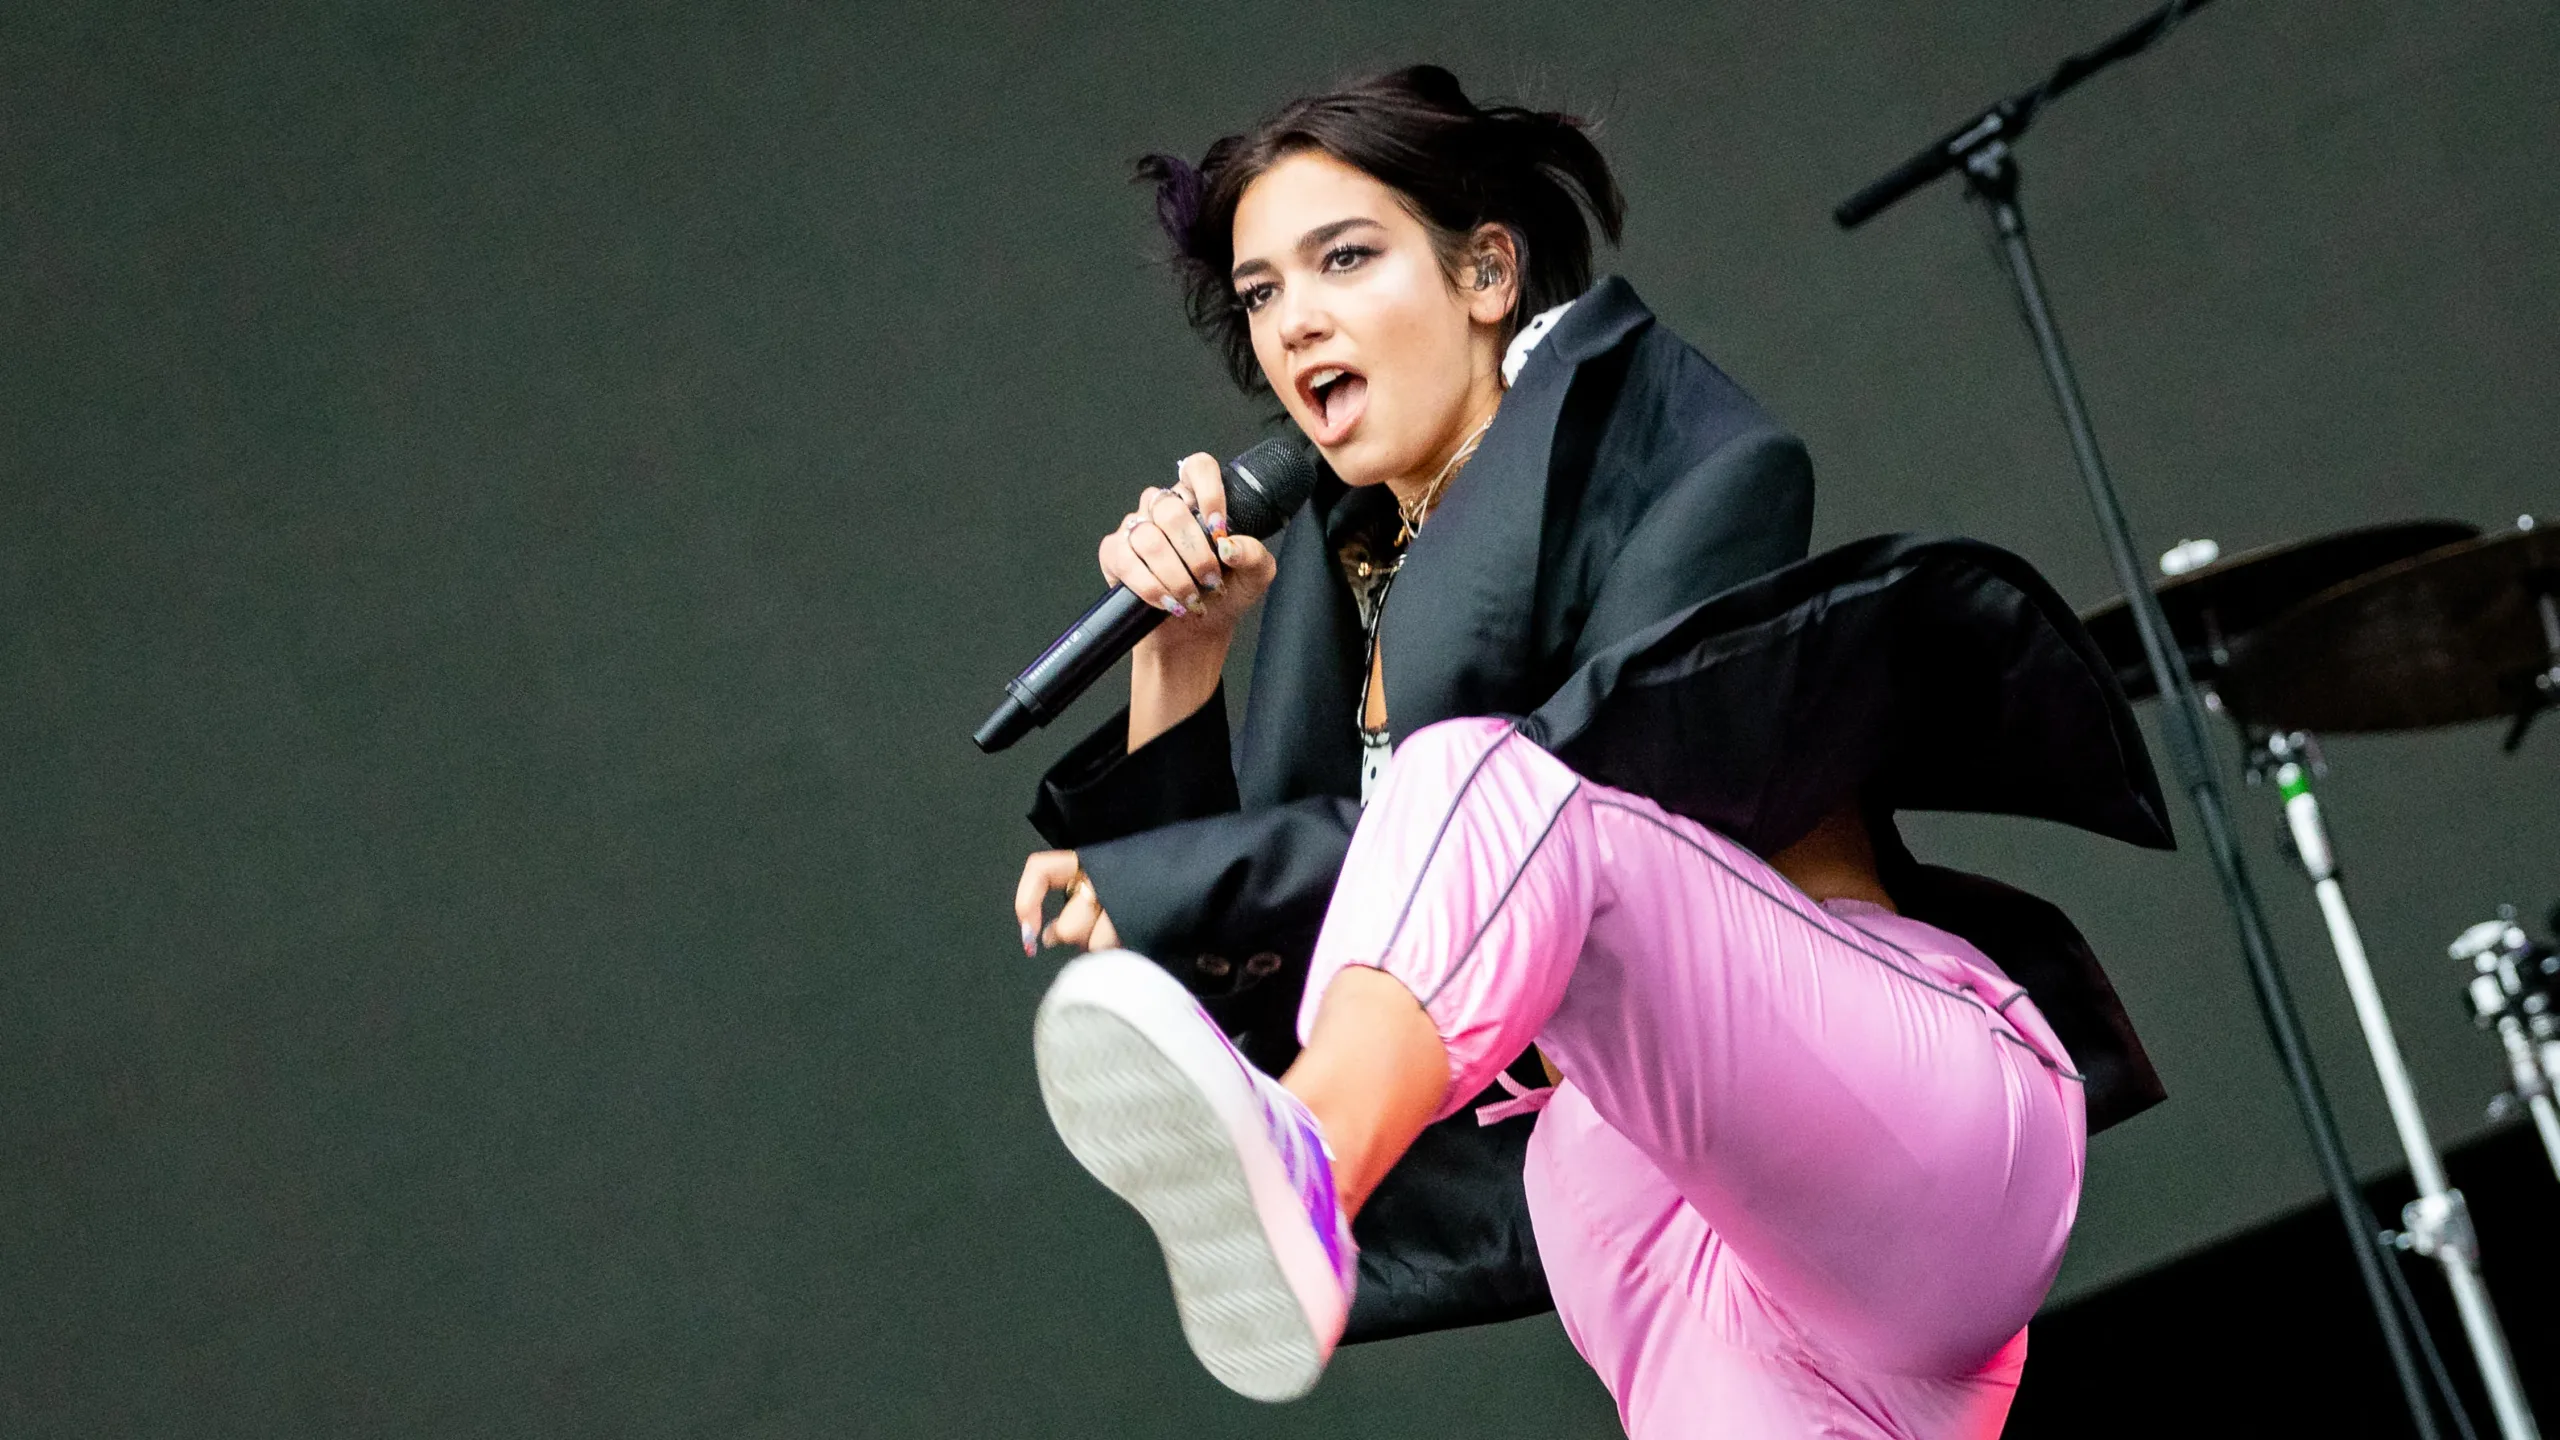 Dua Lipa performs highkick on stage wearing black jacket and pink trousers